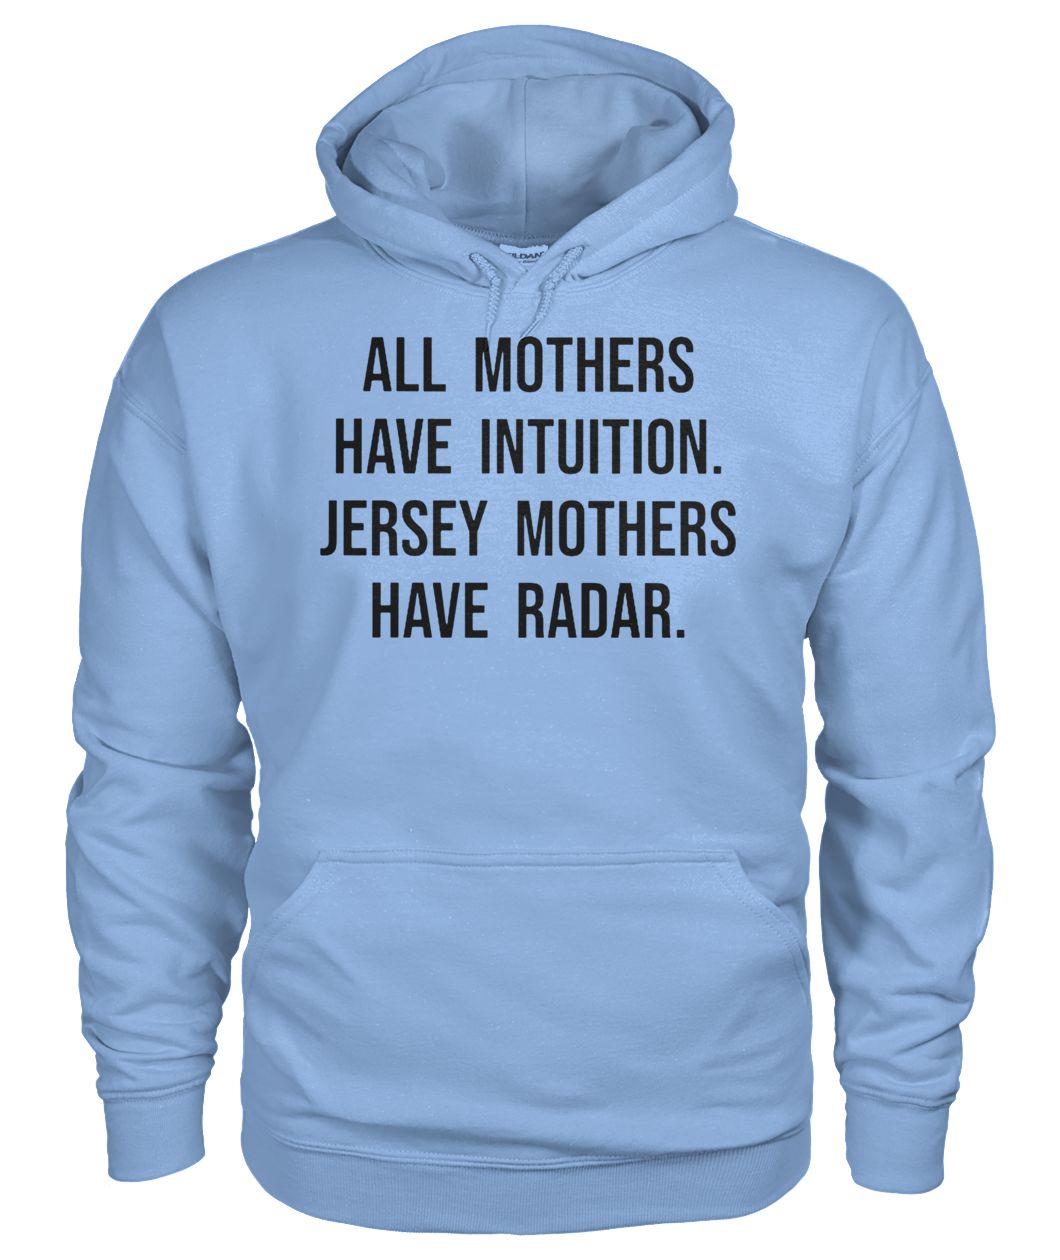 All mothers have intuition jersey mothers have radar gildan hoodie